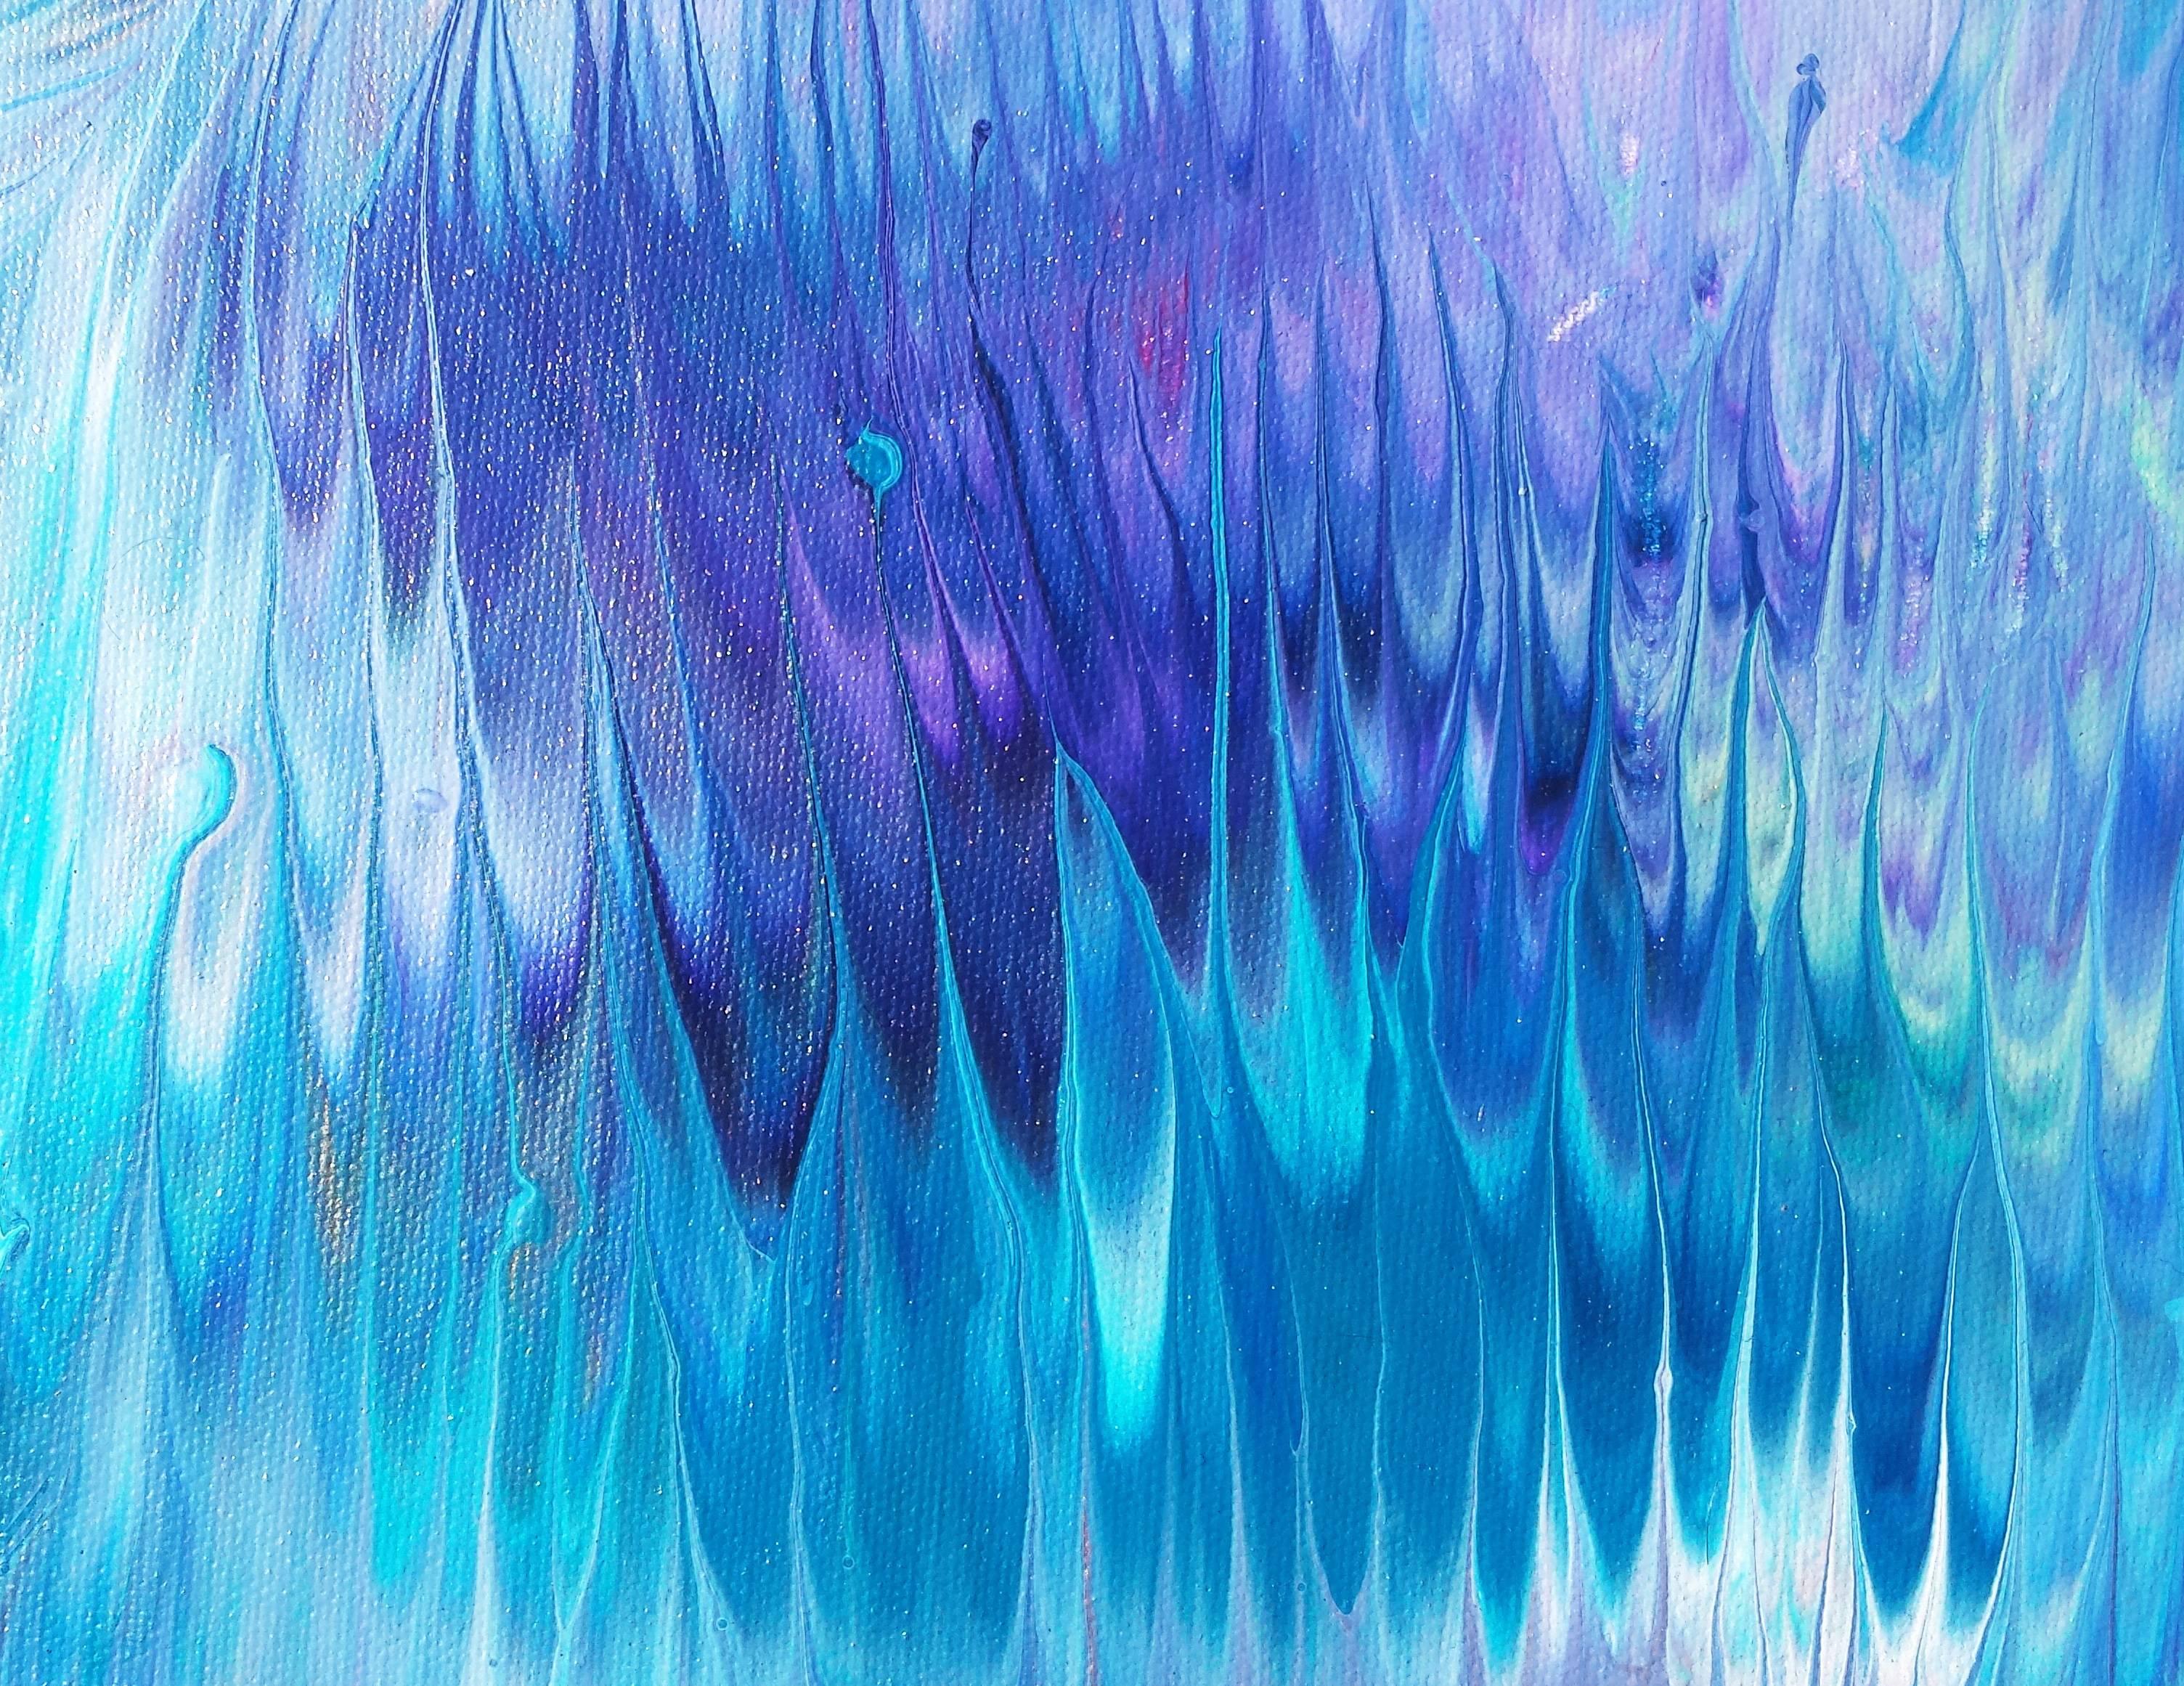 Transcendence II. Original.  - Blue Abstract Painting by Alexandra Romano